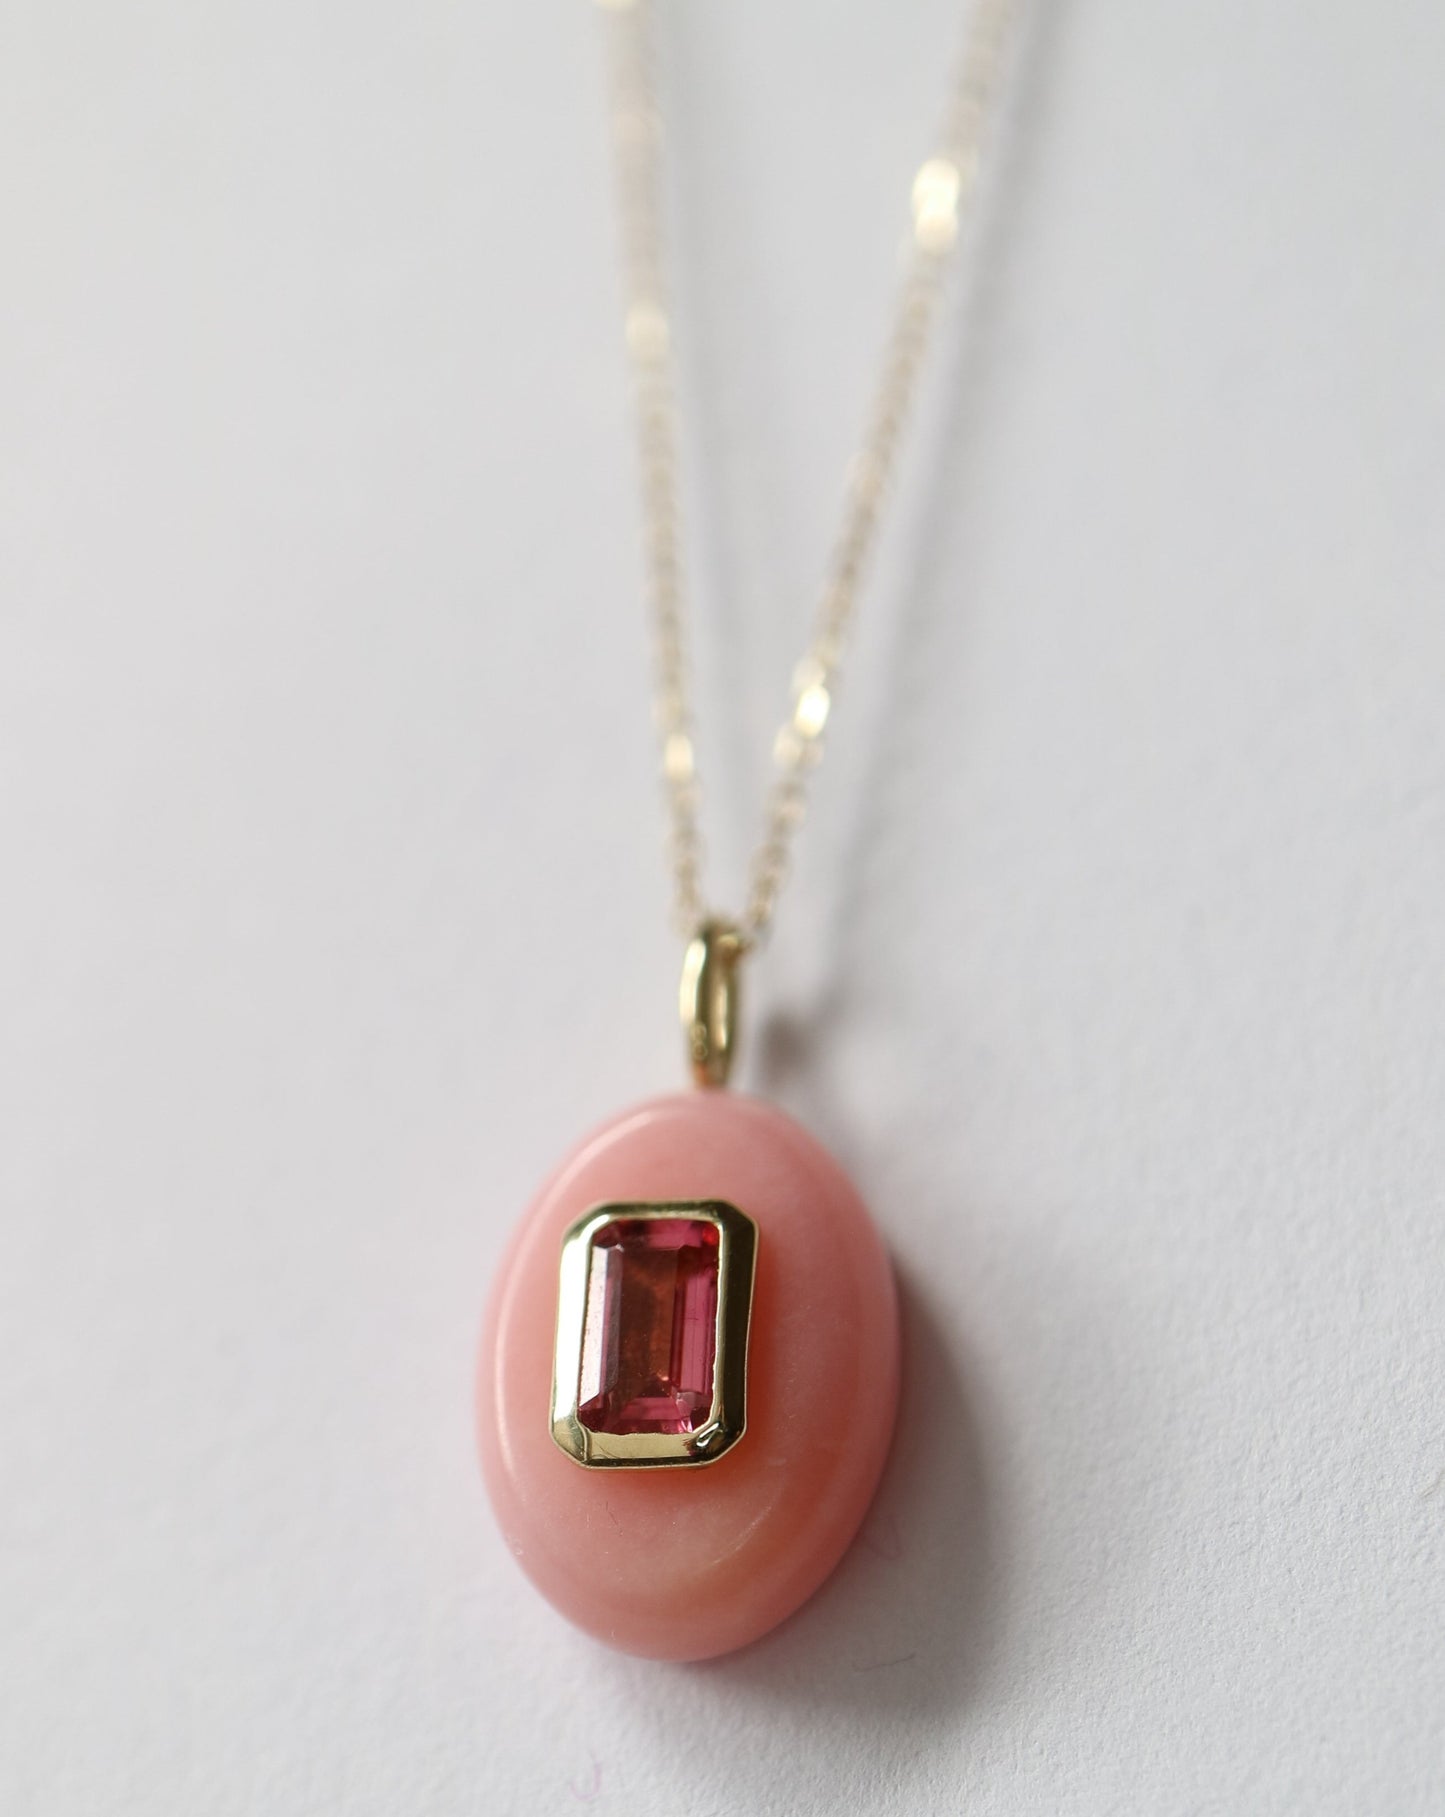 9ct gold and pink tourmaline pendant by Collective & Co.